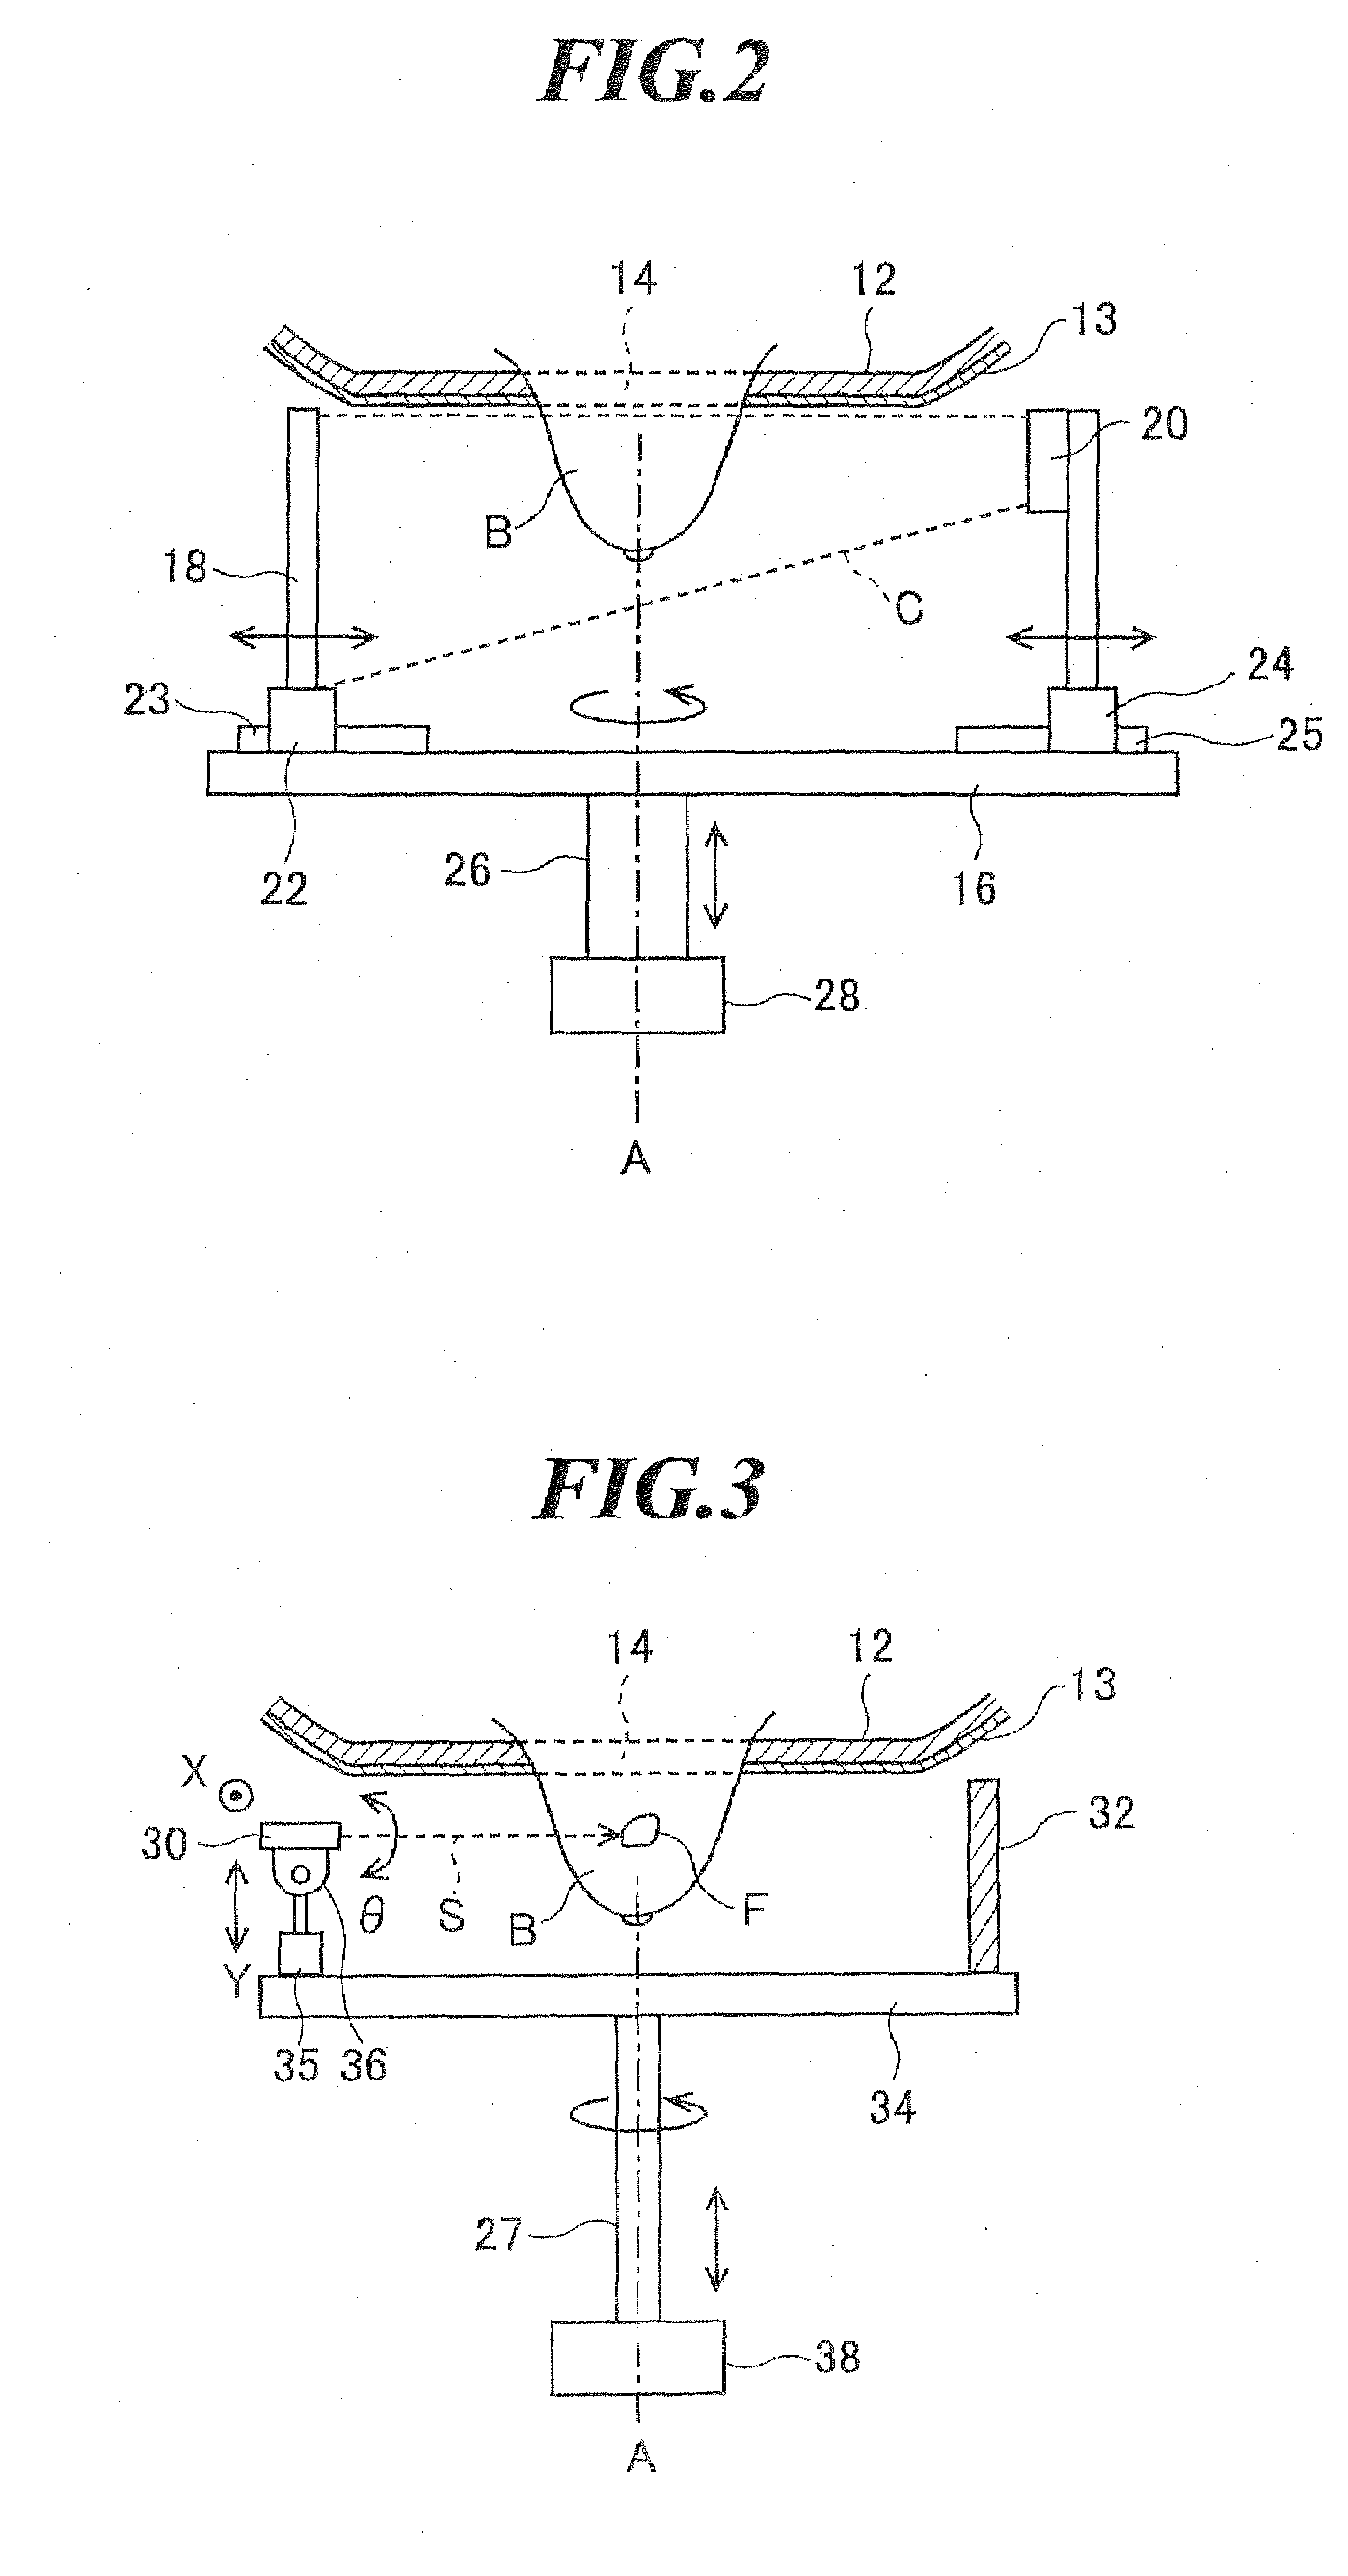 Radiation imaging and therapy apparatus for breast